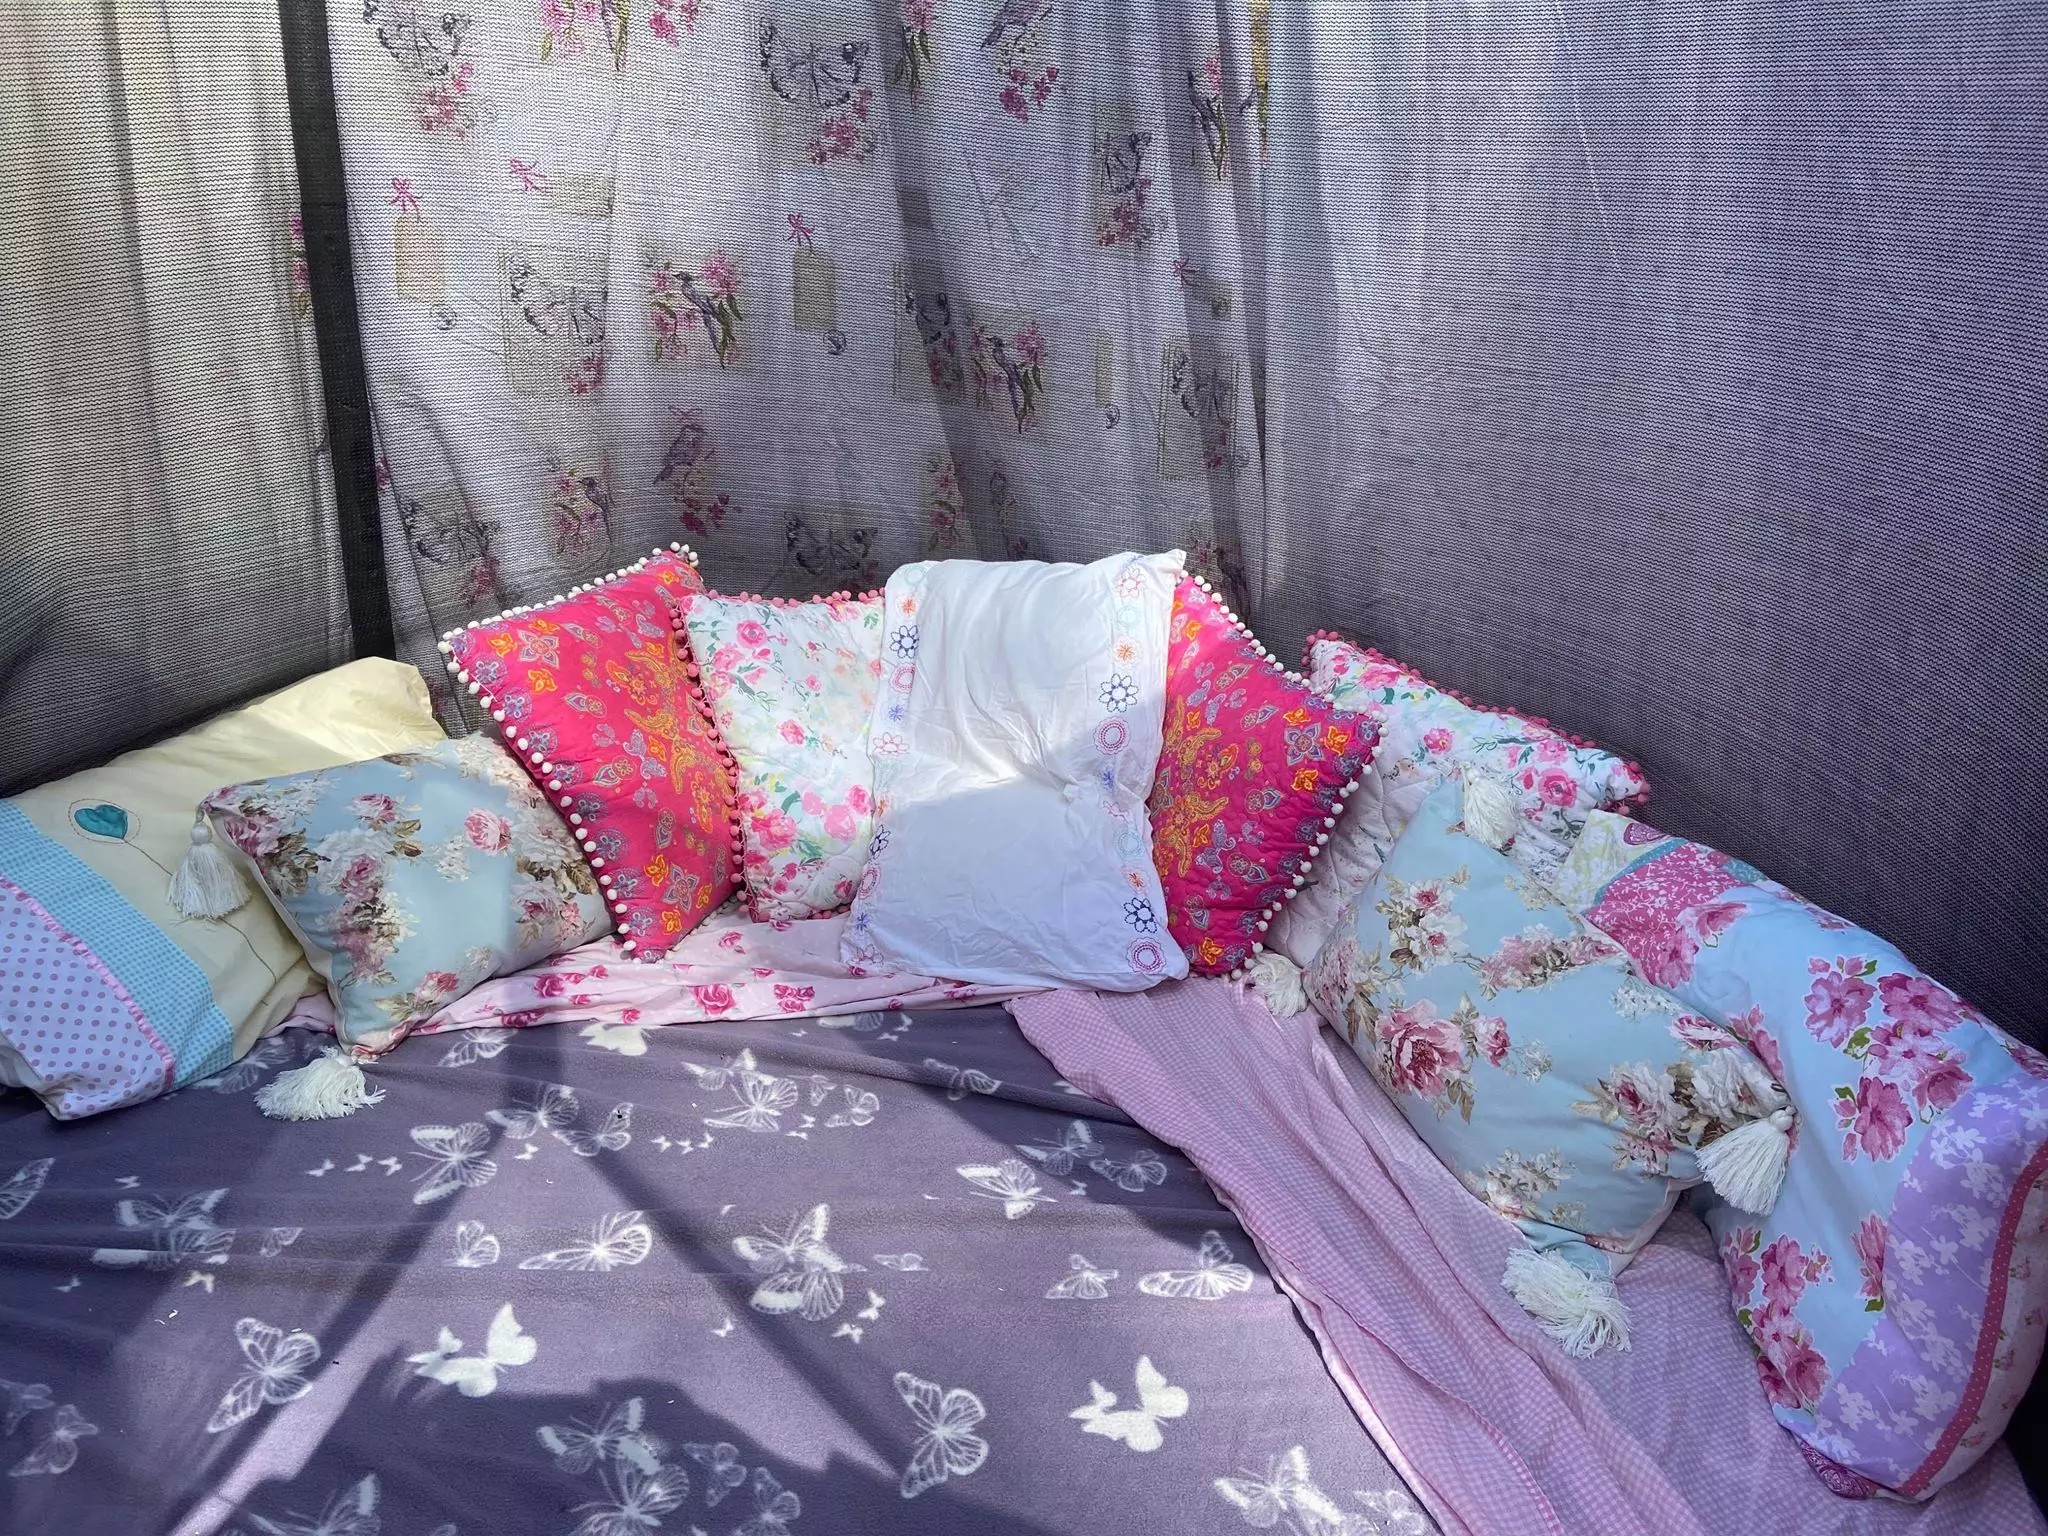 The mum-of-three decorated the inside with old sheets and cushions (